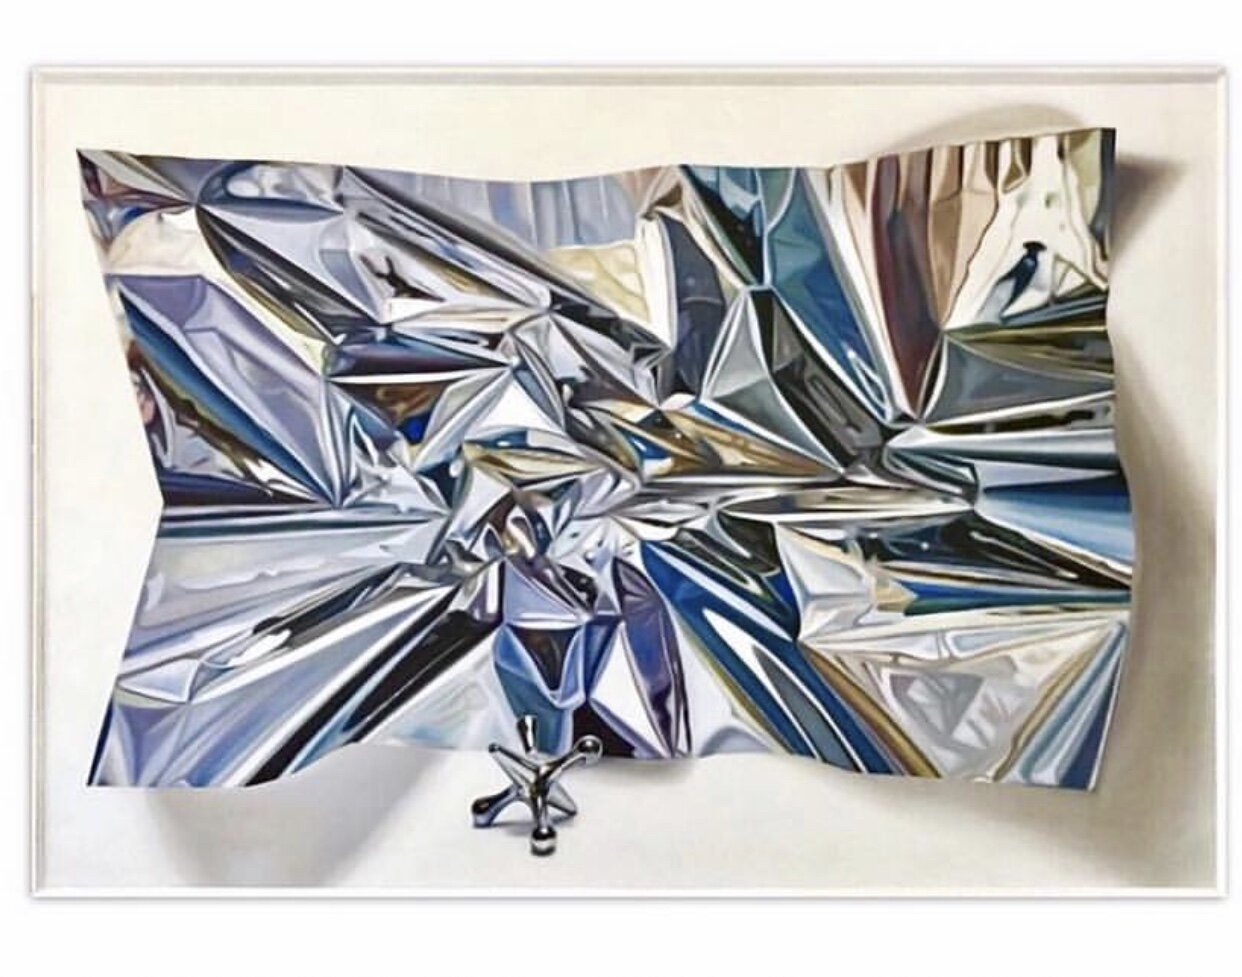   “Metallic paper vs jacks”   Changing Papers Series  Oil on canvas  200 x 135 cm  2019 